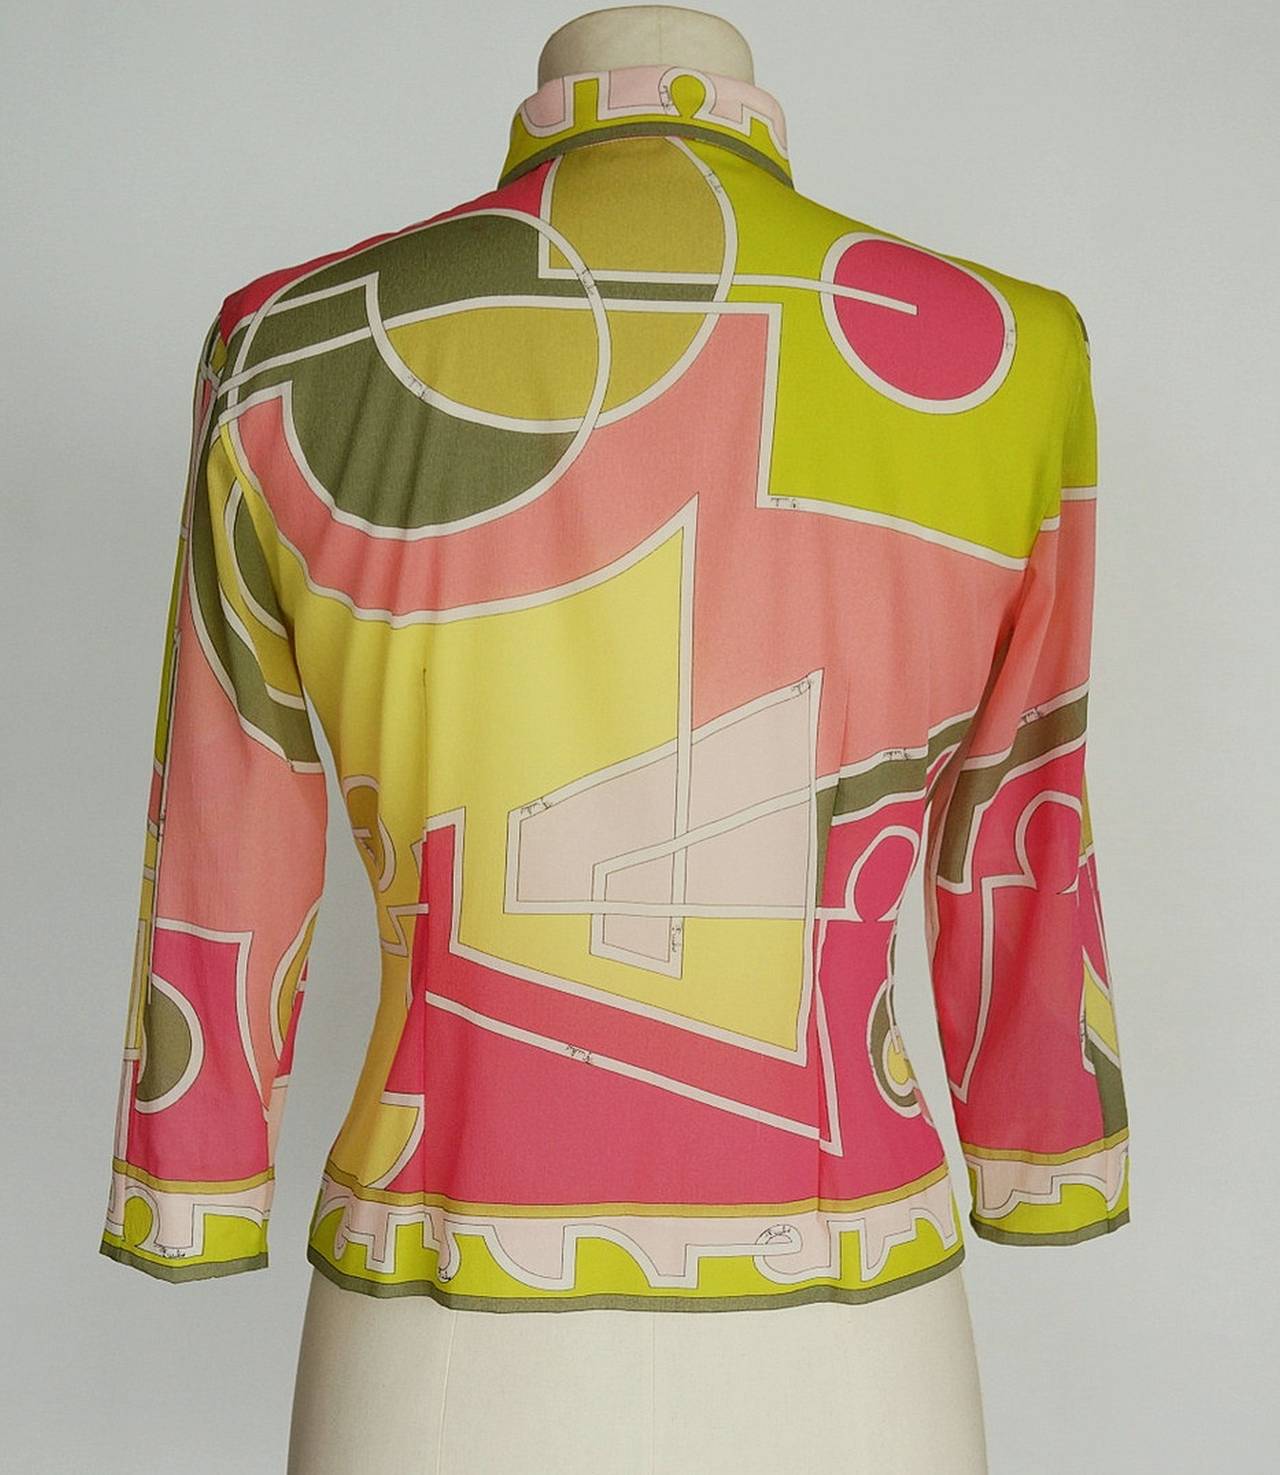 Late 1960s or Early 1970s Rare Iconic Emilio Pucci Silk Blouse In Excellent Condition For Sale In London, UK